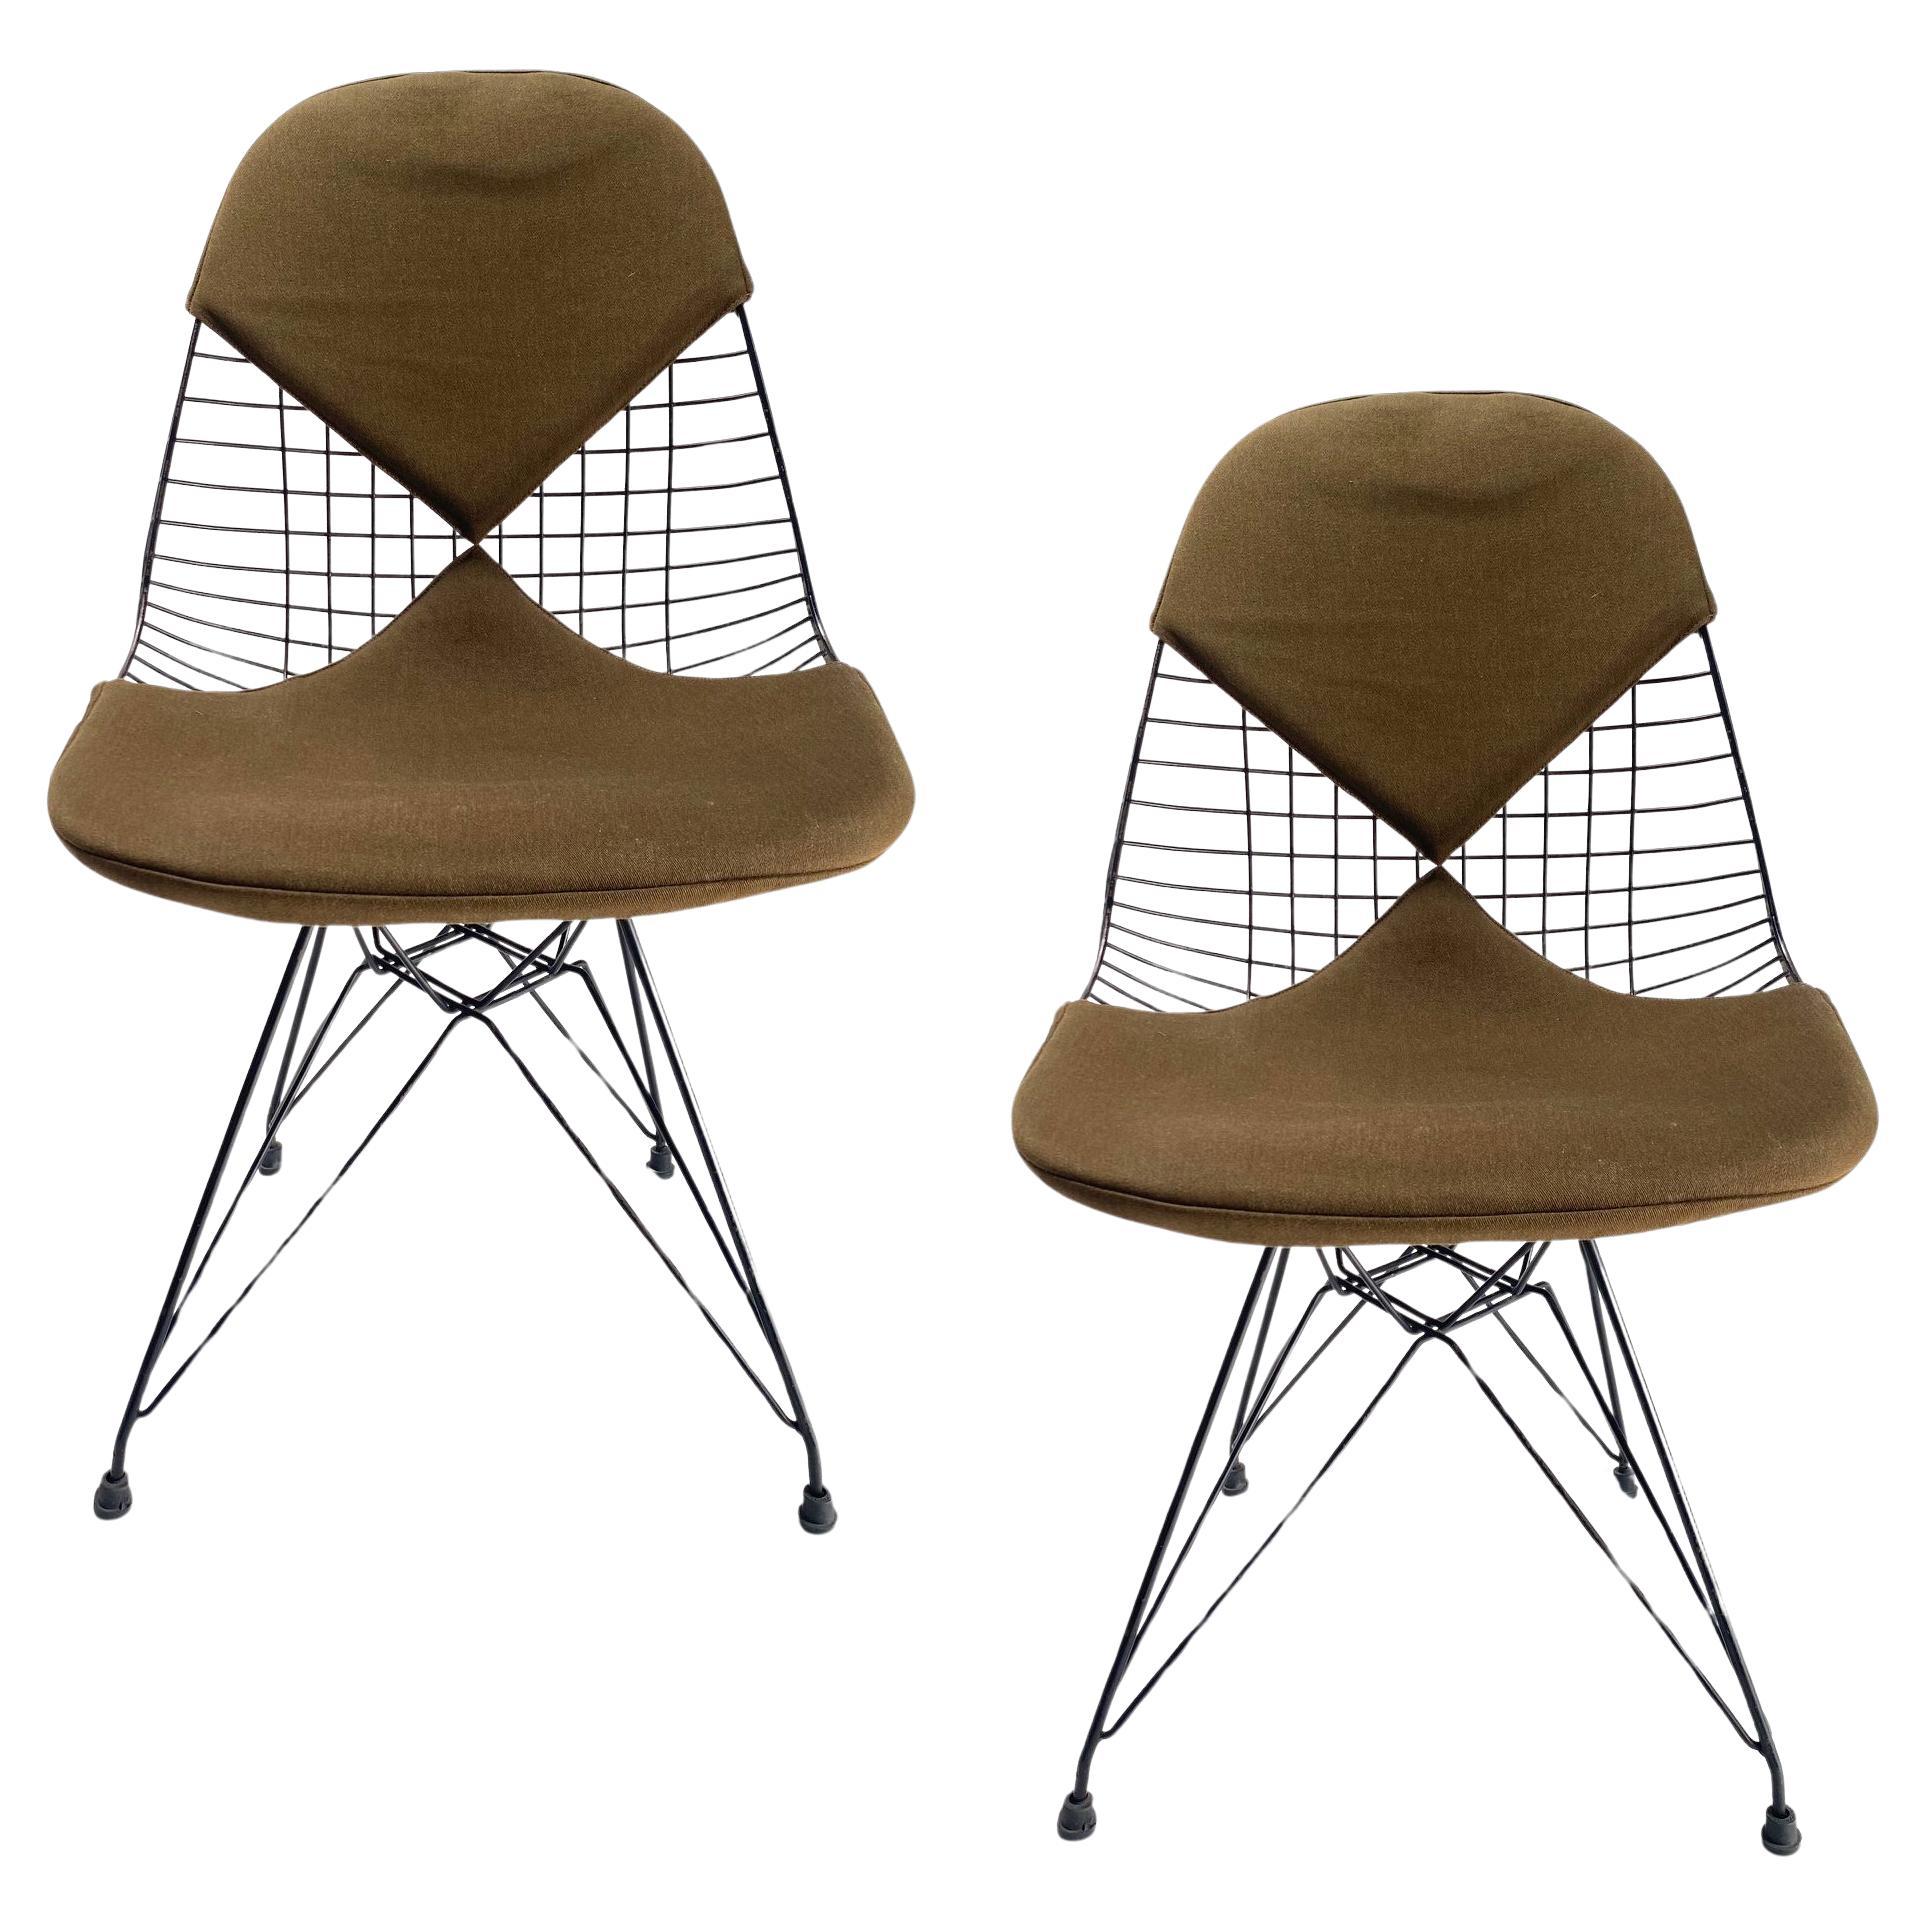 Charles Eames Wire Chairs with Bikini Cover on Eiffel Base's (Old Edition)